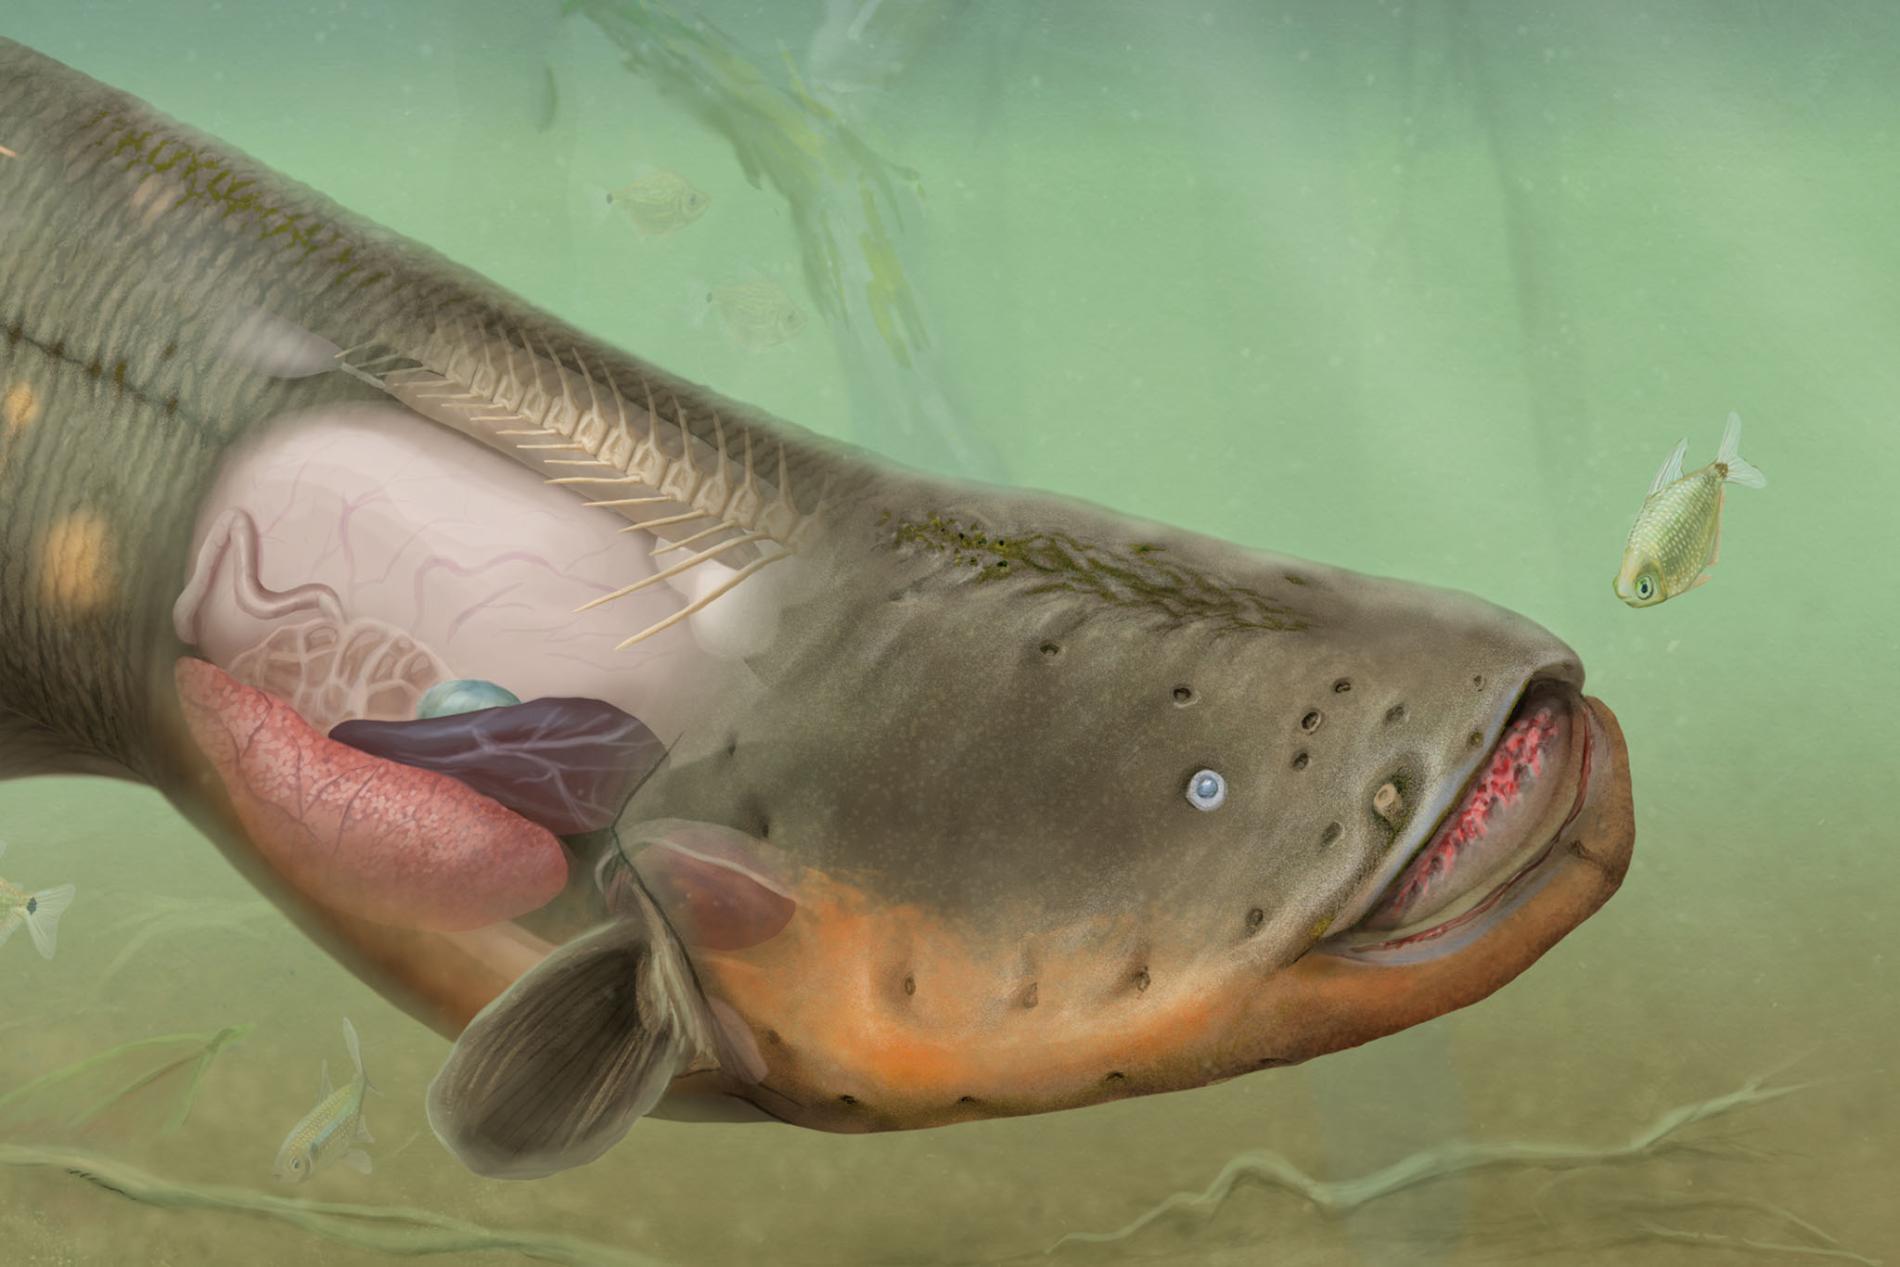 How Electric Eels Zap Their Prey, Visualized